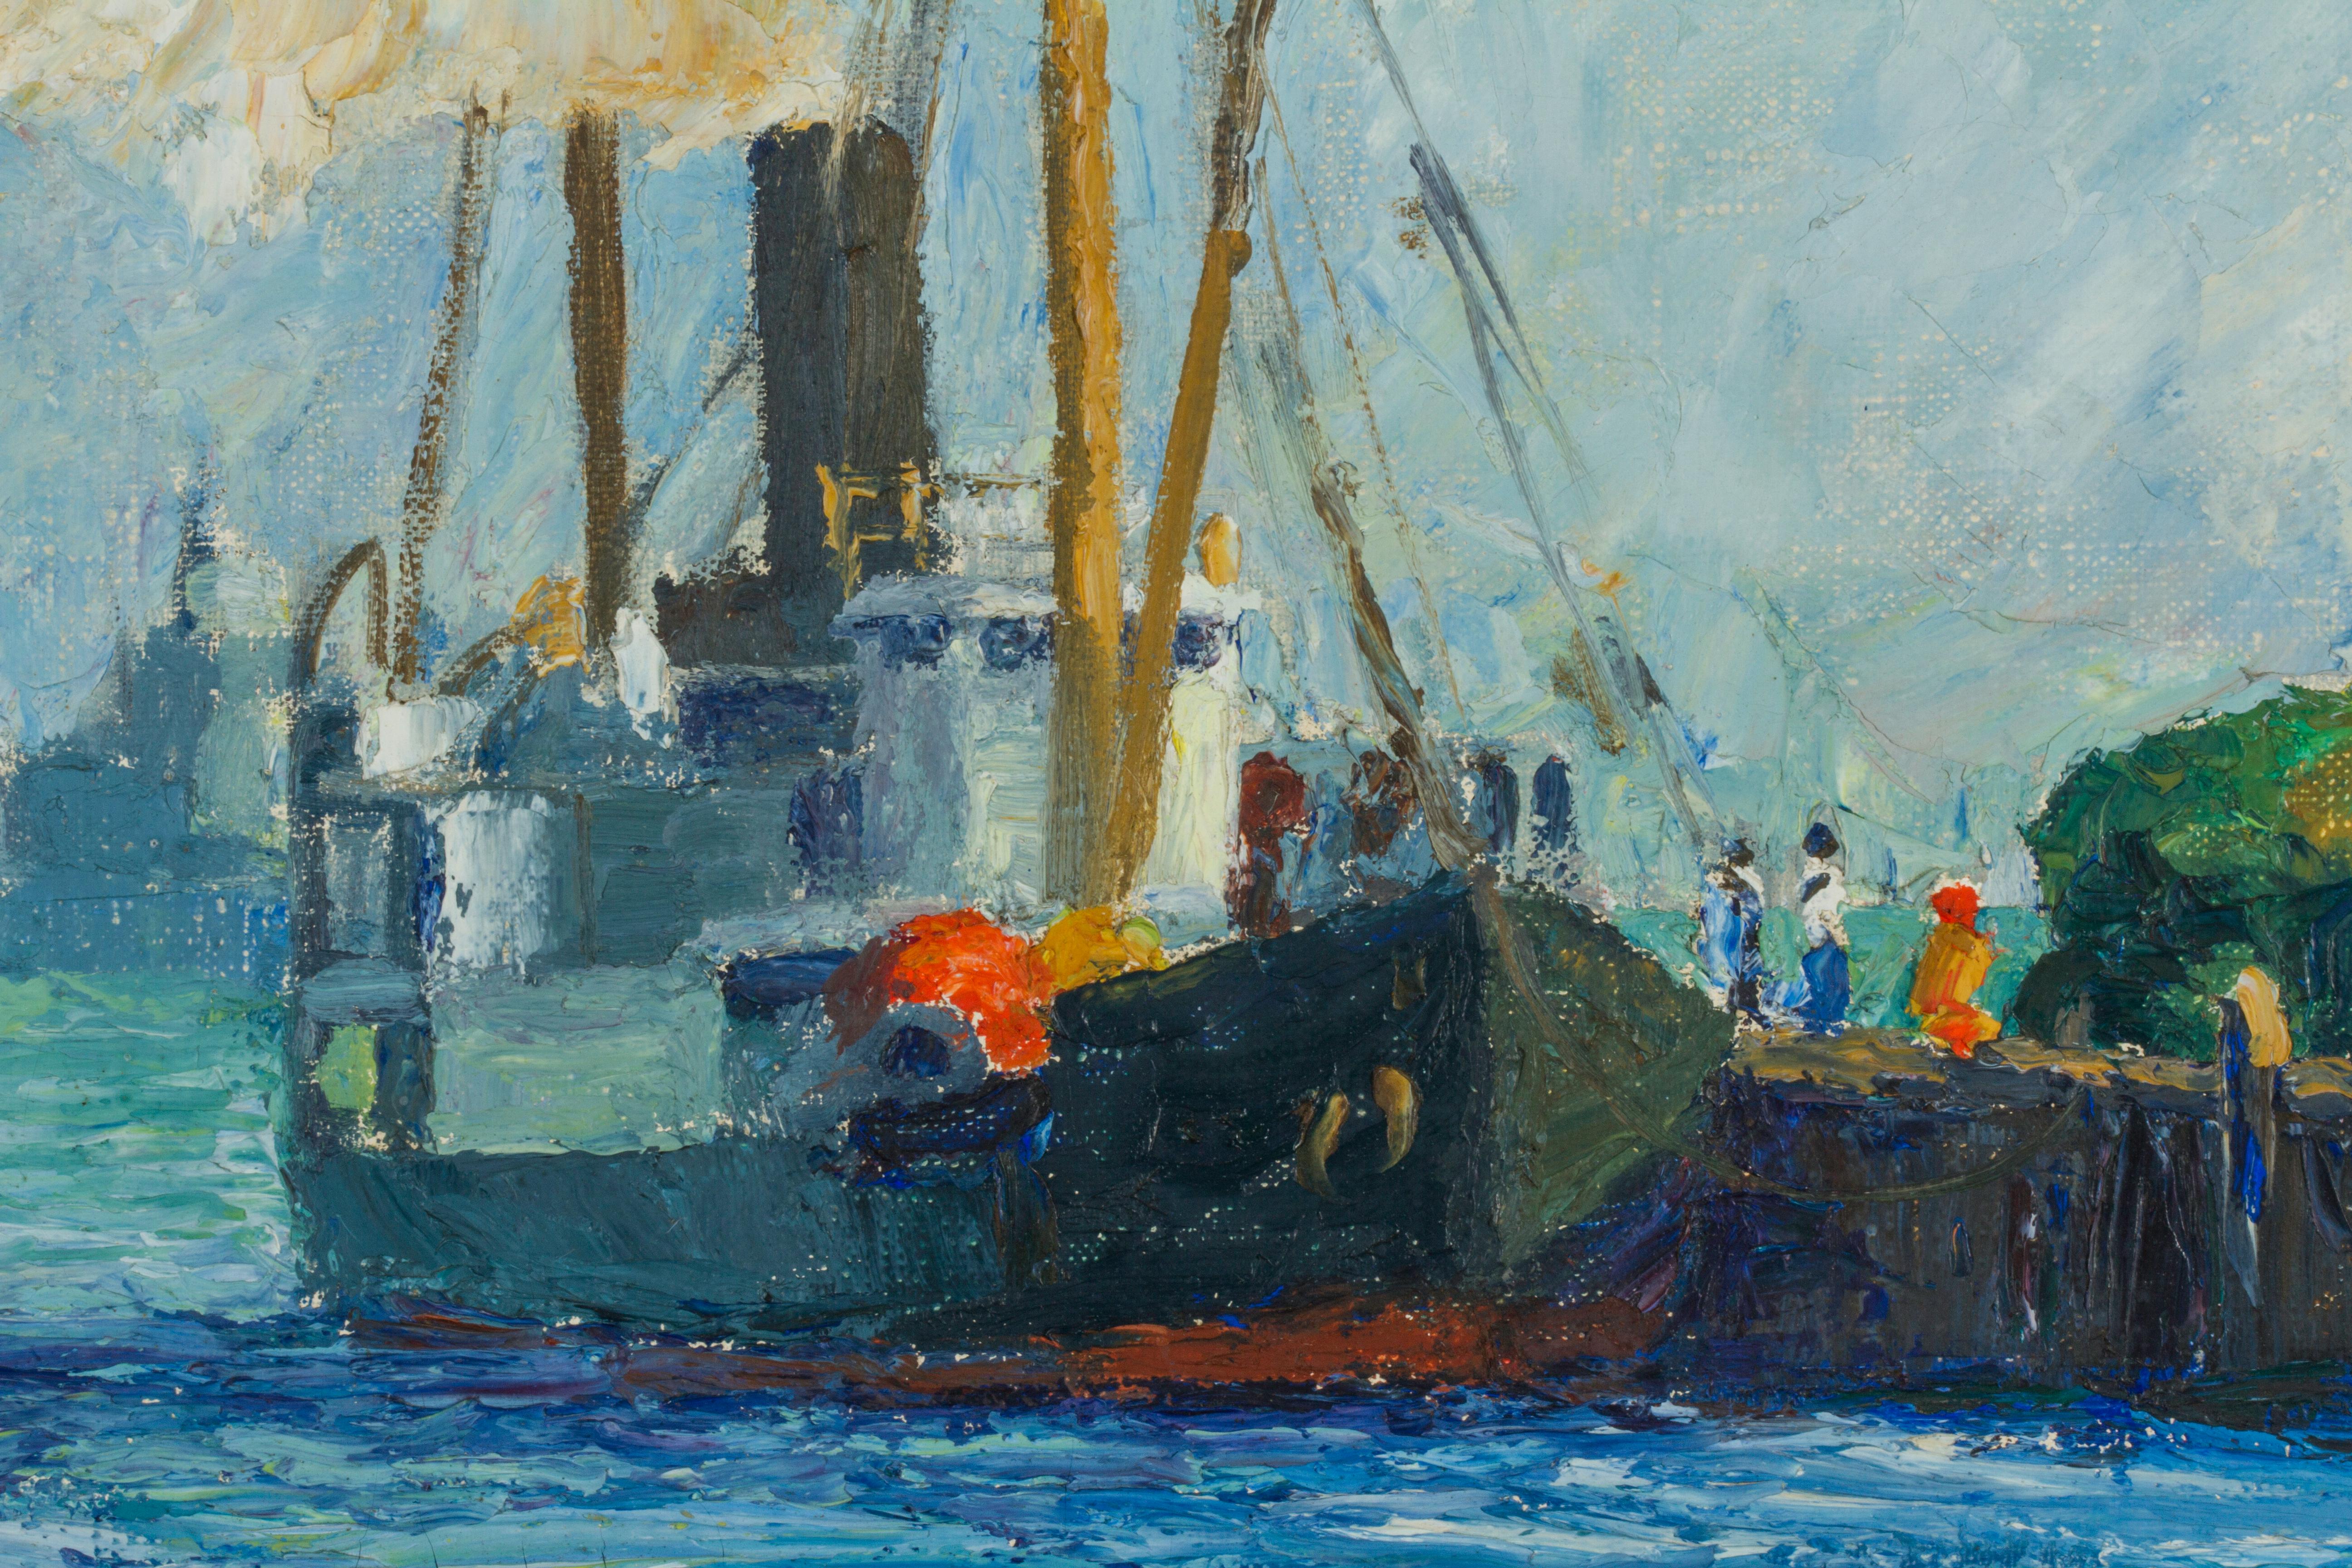 American Painting by Louis Krupp “Harbor Ships” For Sale